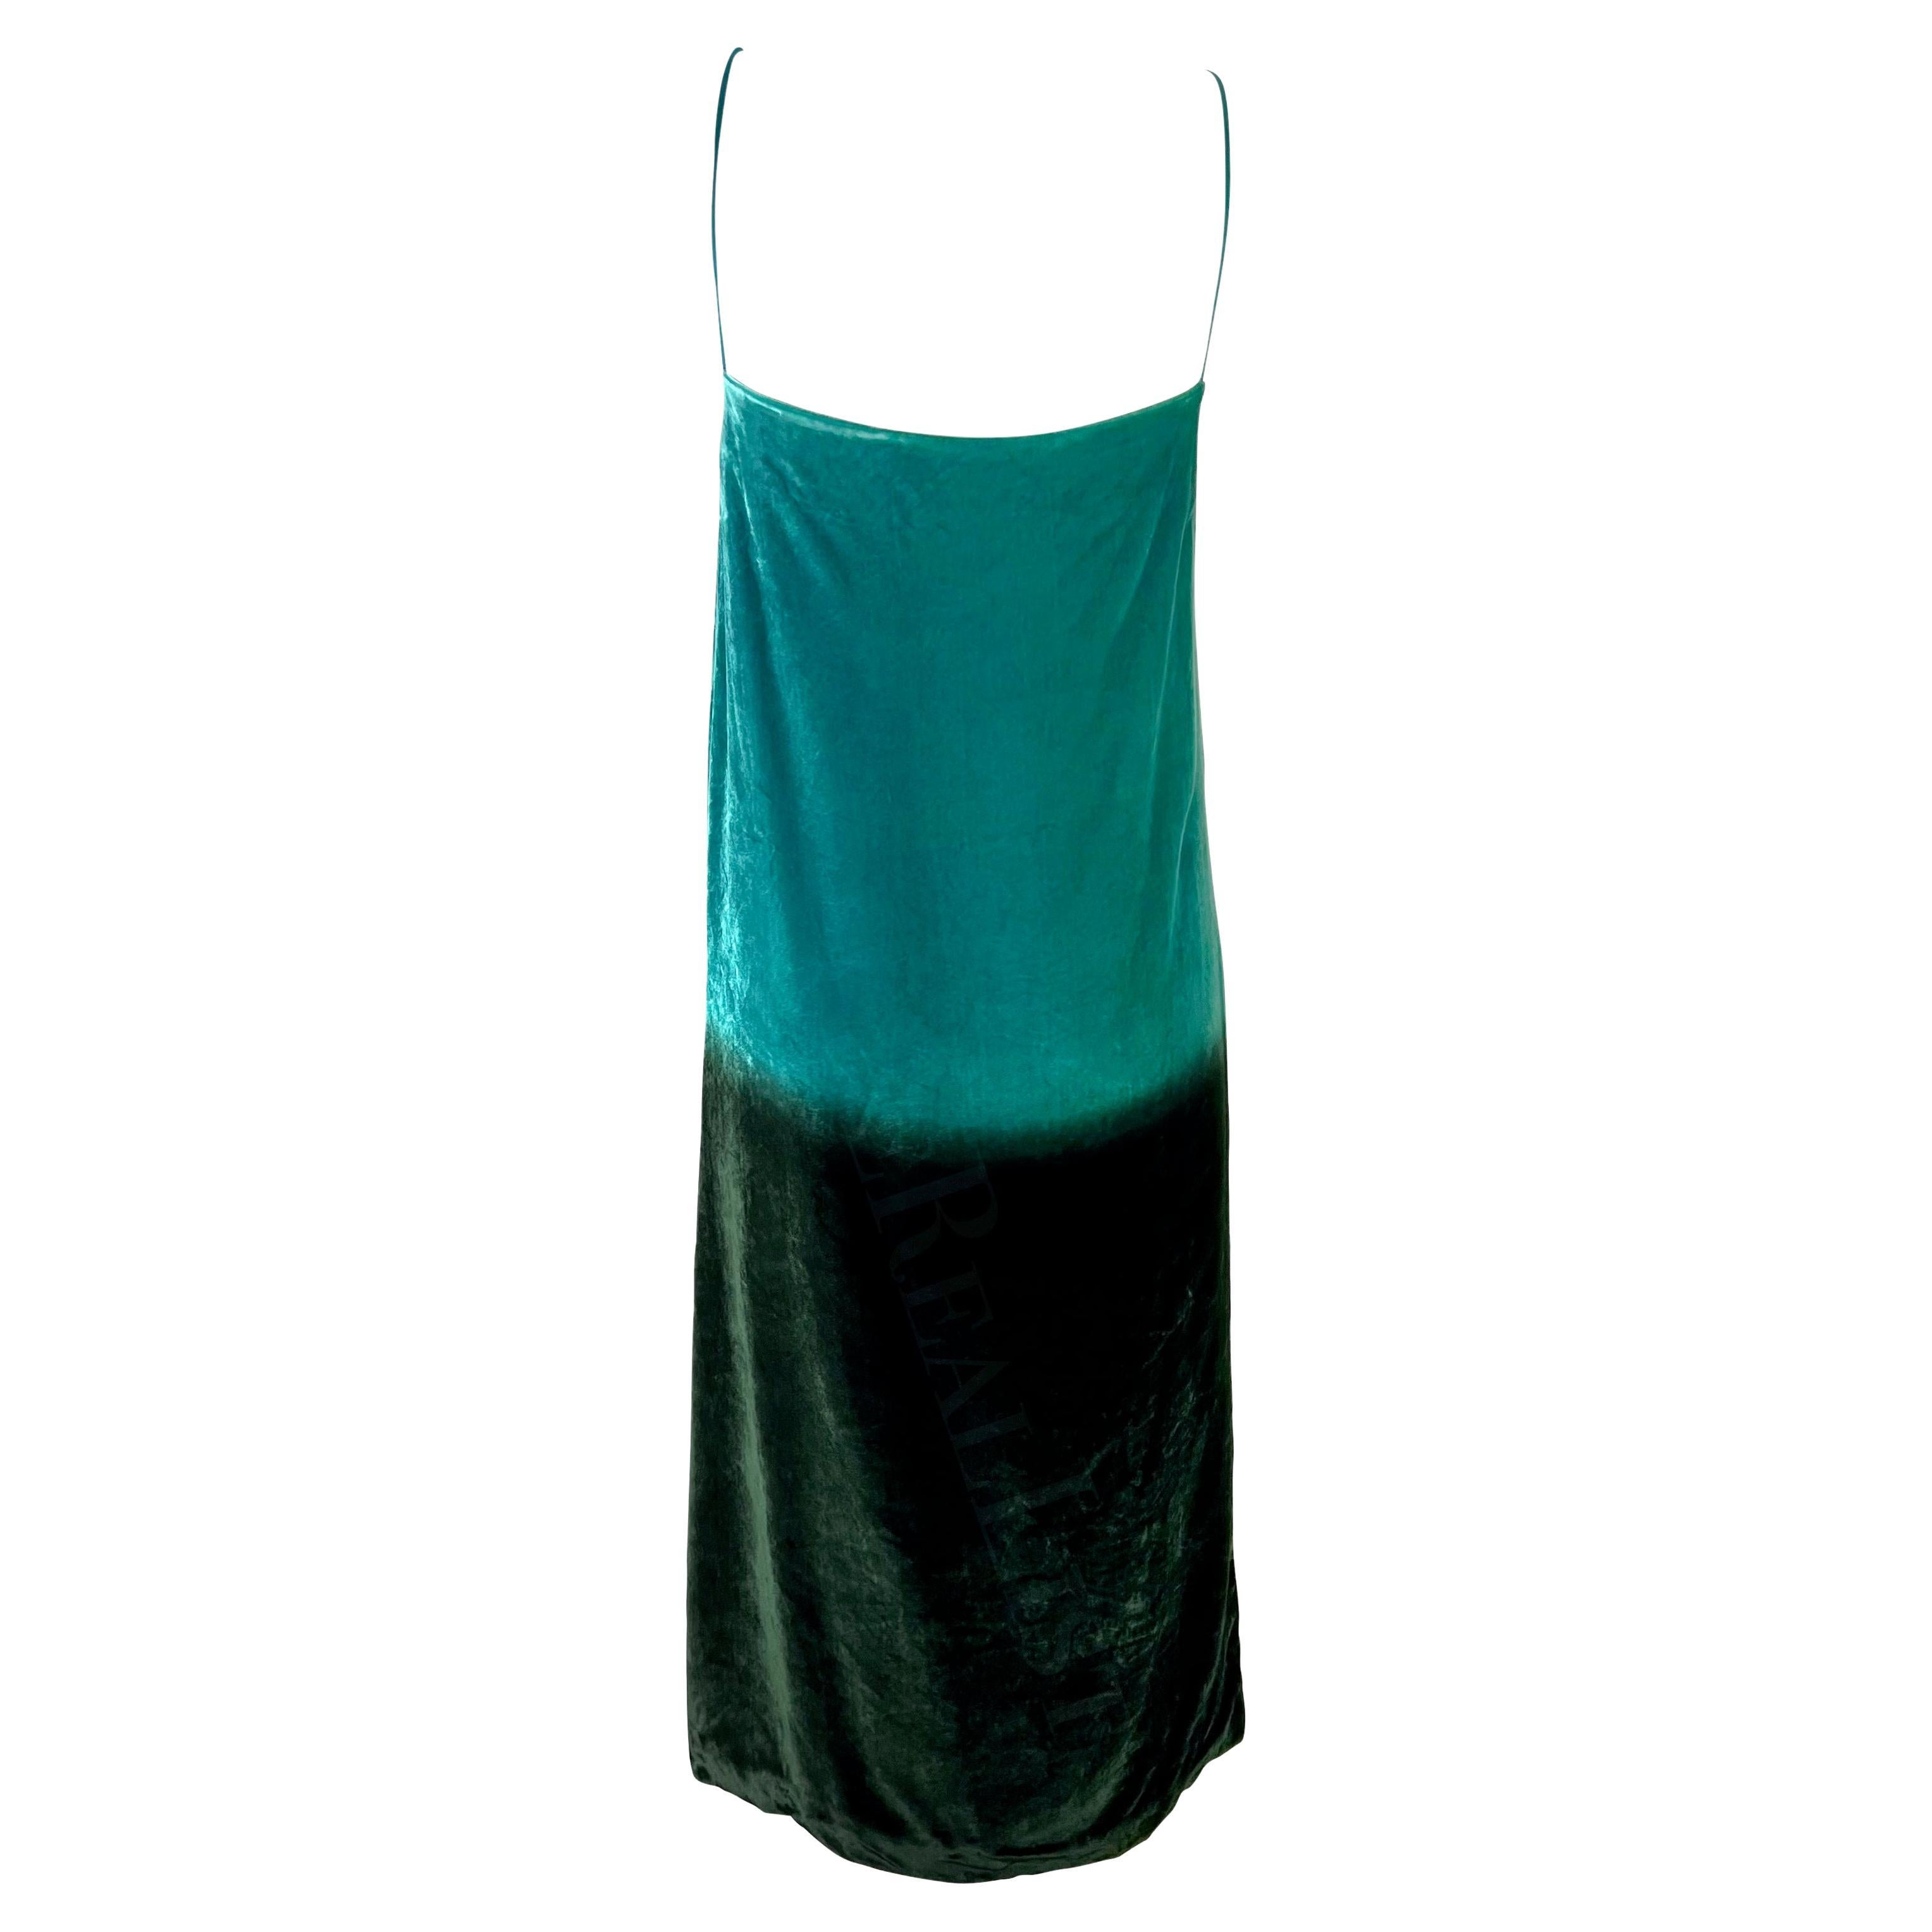 S/S 1997 Gucci by Tom Ford Runway Green Blue Ombré Velvet Shift Dress For Sale 5